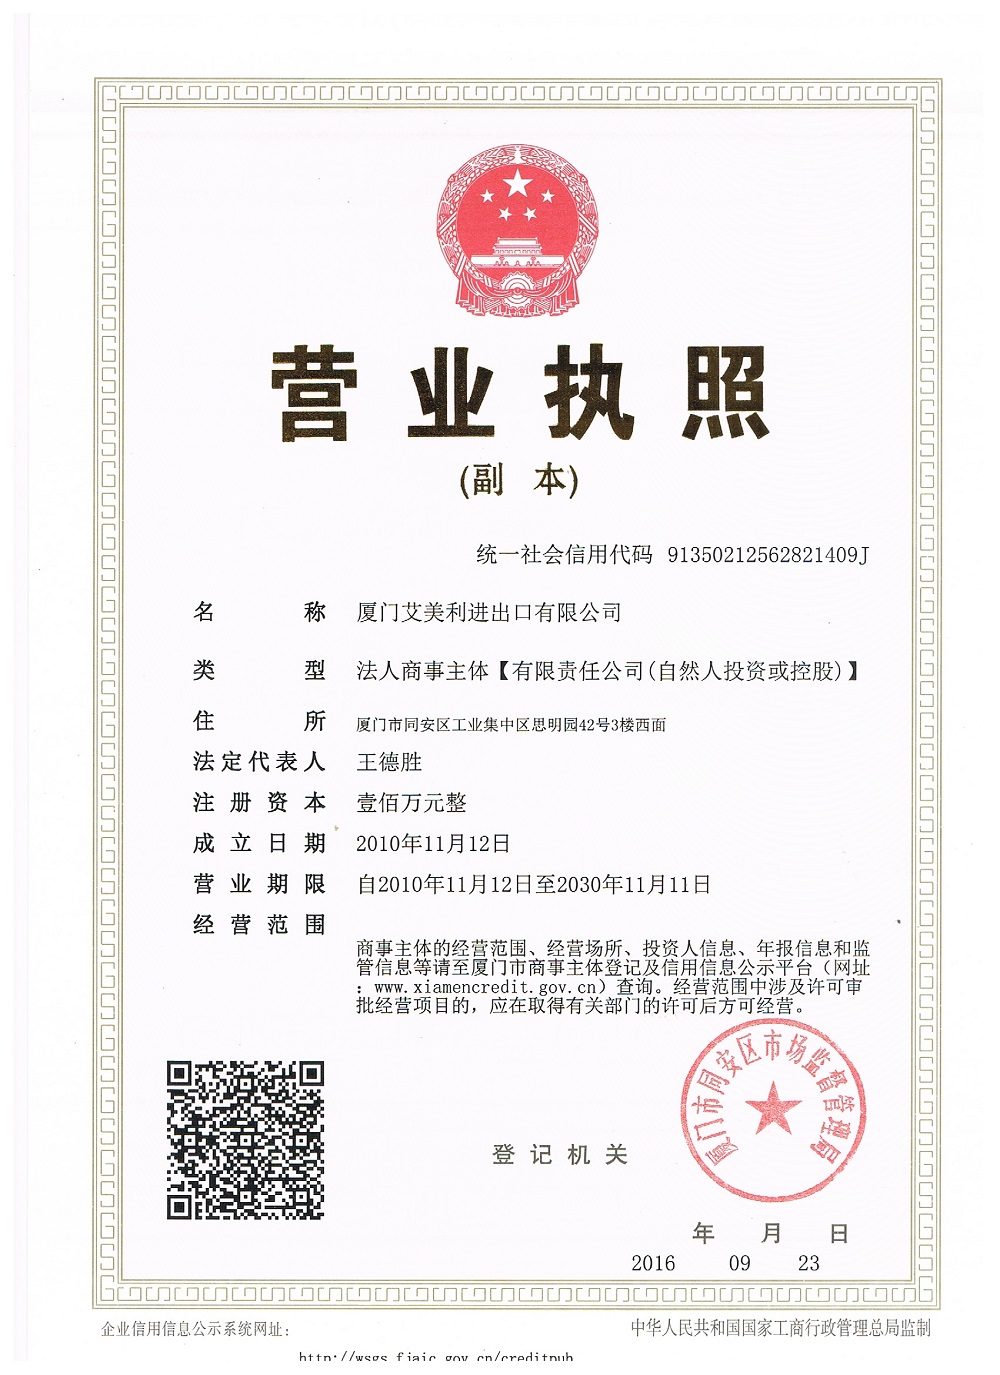 Our Business License